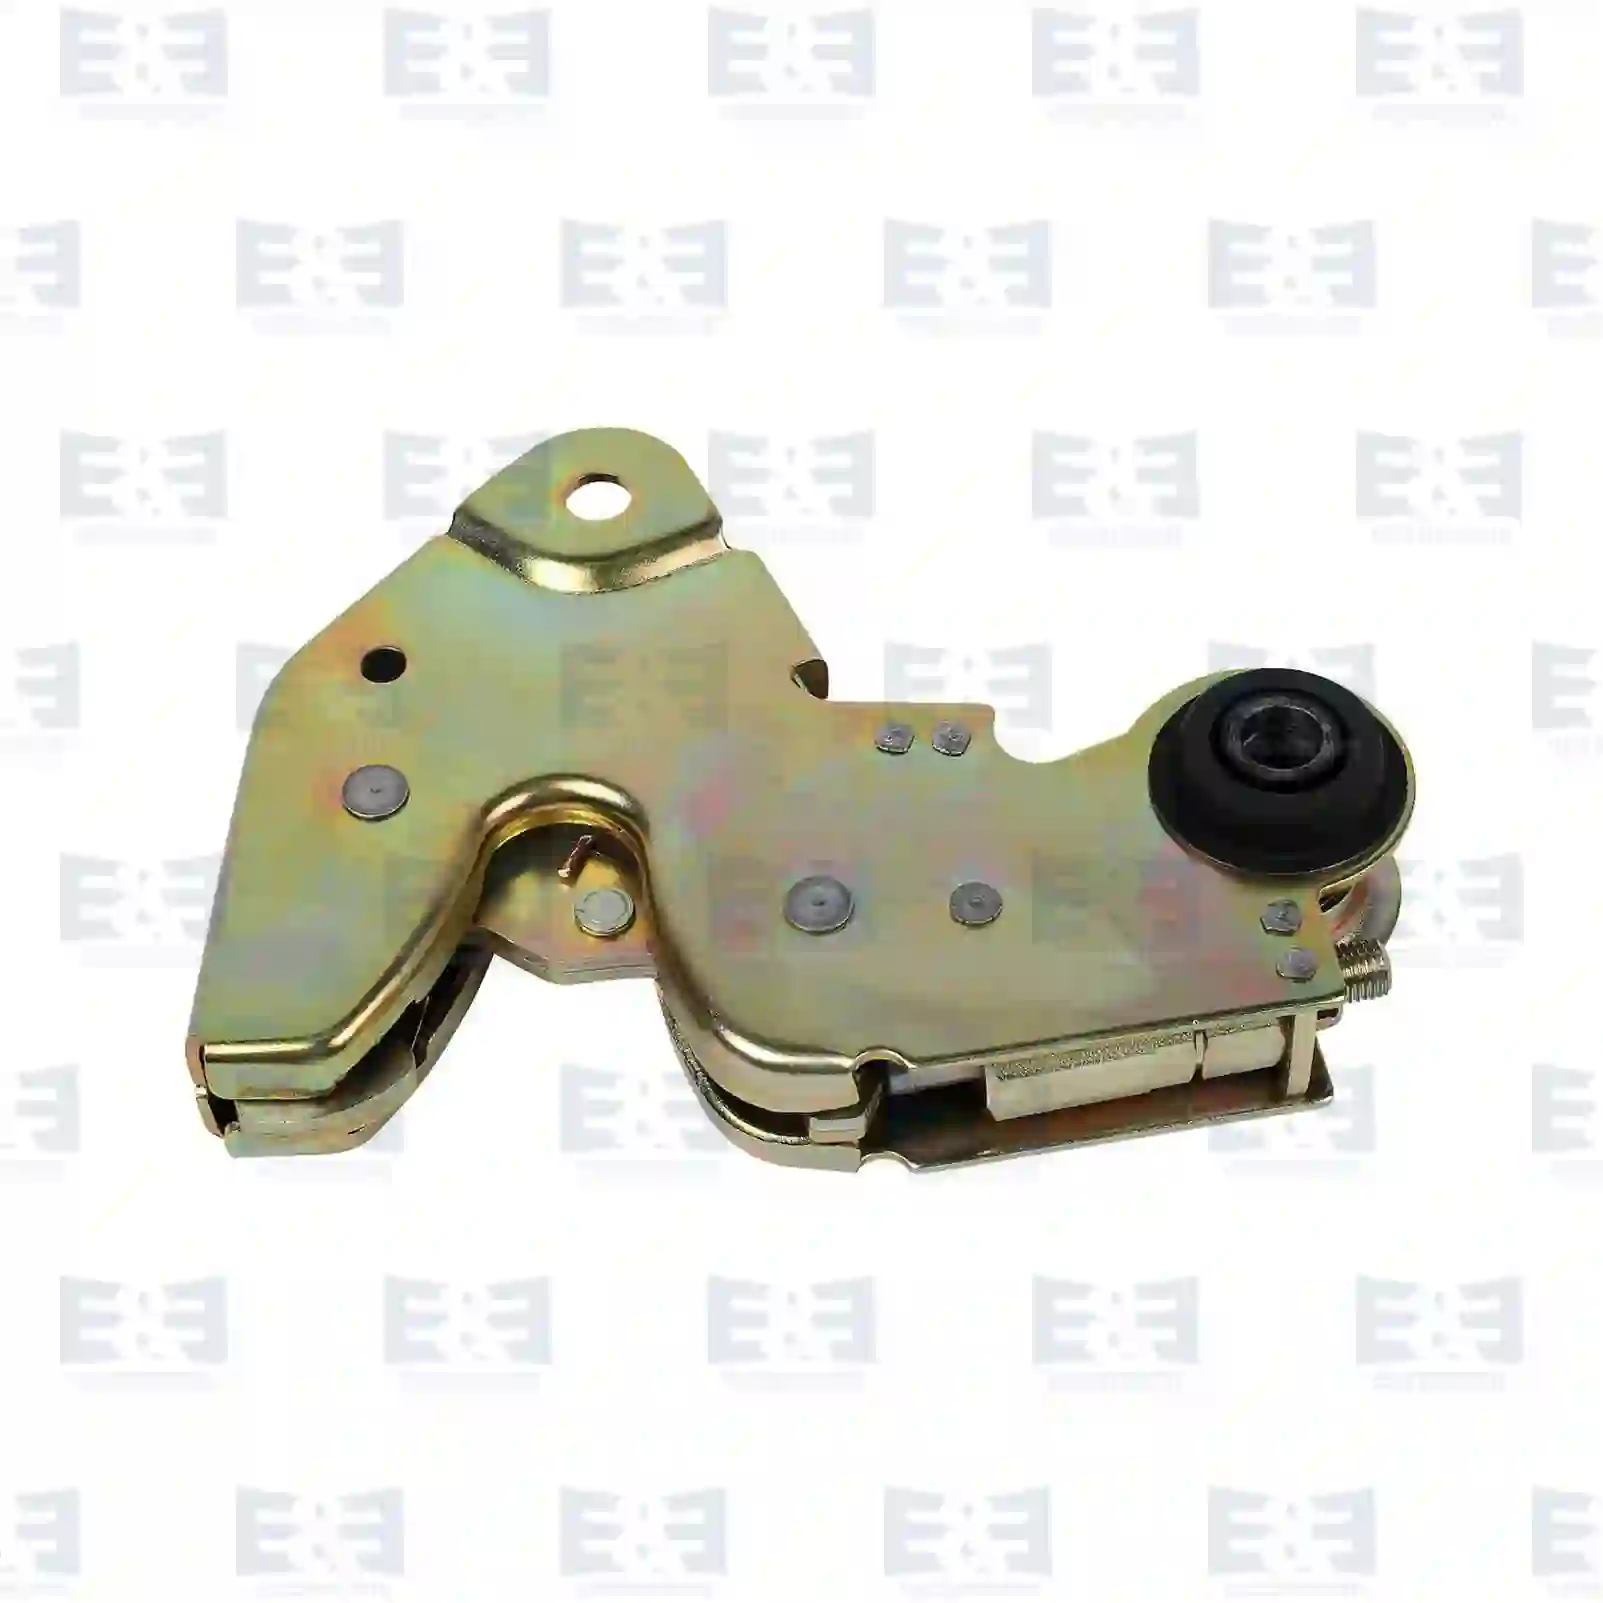 Lock Cabin lock, without switch, EE No 2E2276452 ,  oem no:81618516011S1, 81618516019S1, 81618516020S1, 81618516023S1, 81618516029S1 E&E Truck Spare Parts | Truck Spare Parts, Auotomotive Spare Parts